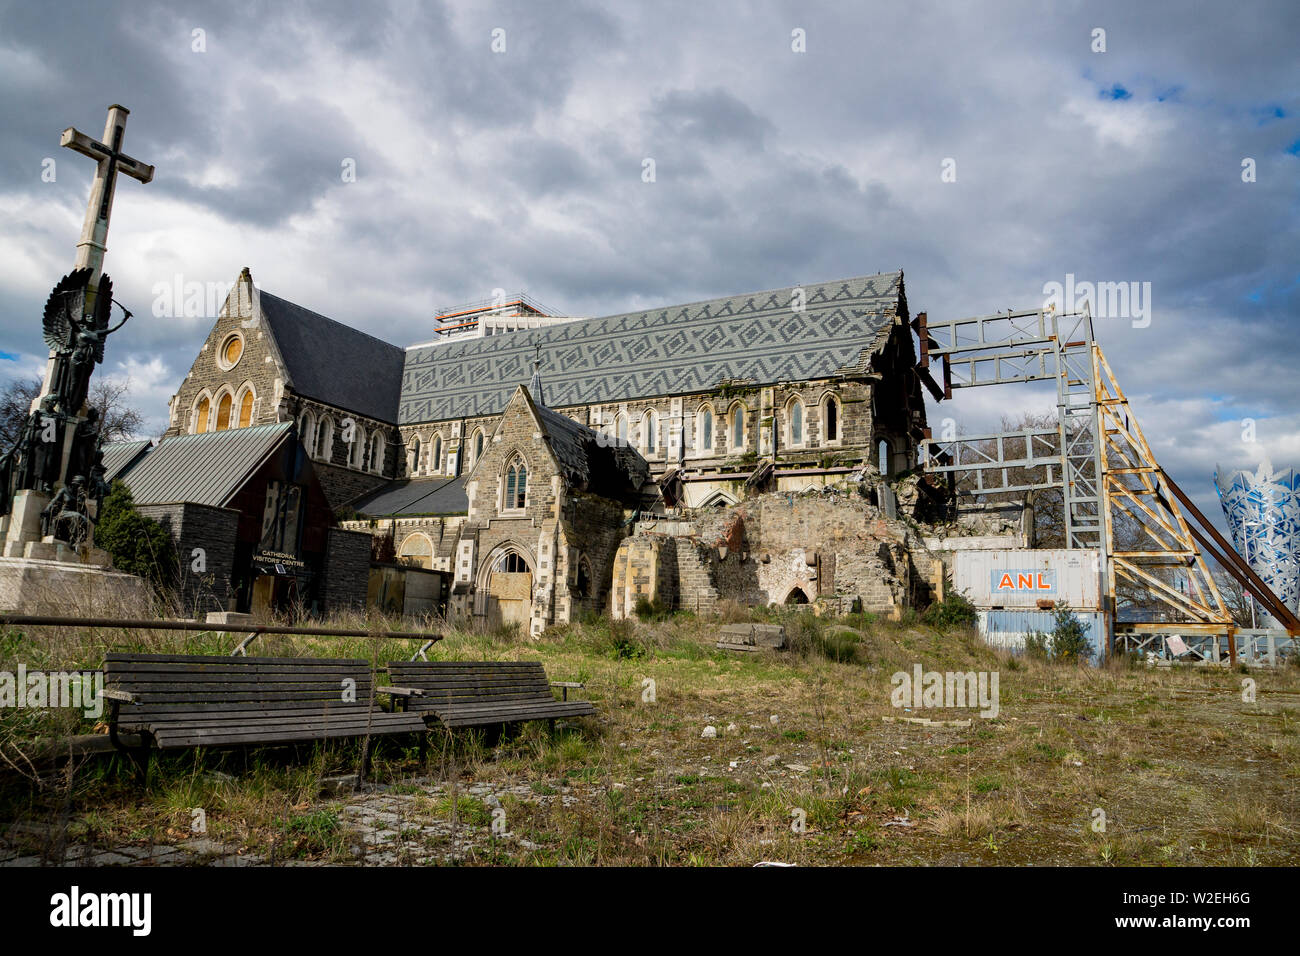 Ruins of Christchurch cathedral, New Zealand, supported by steel buttress, under cloudy sky Stock Photo